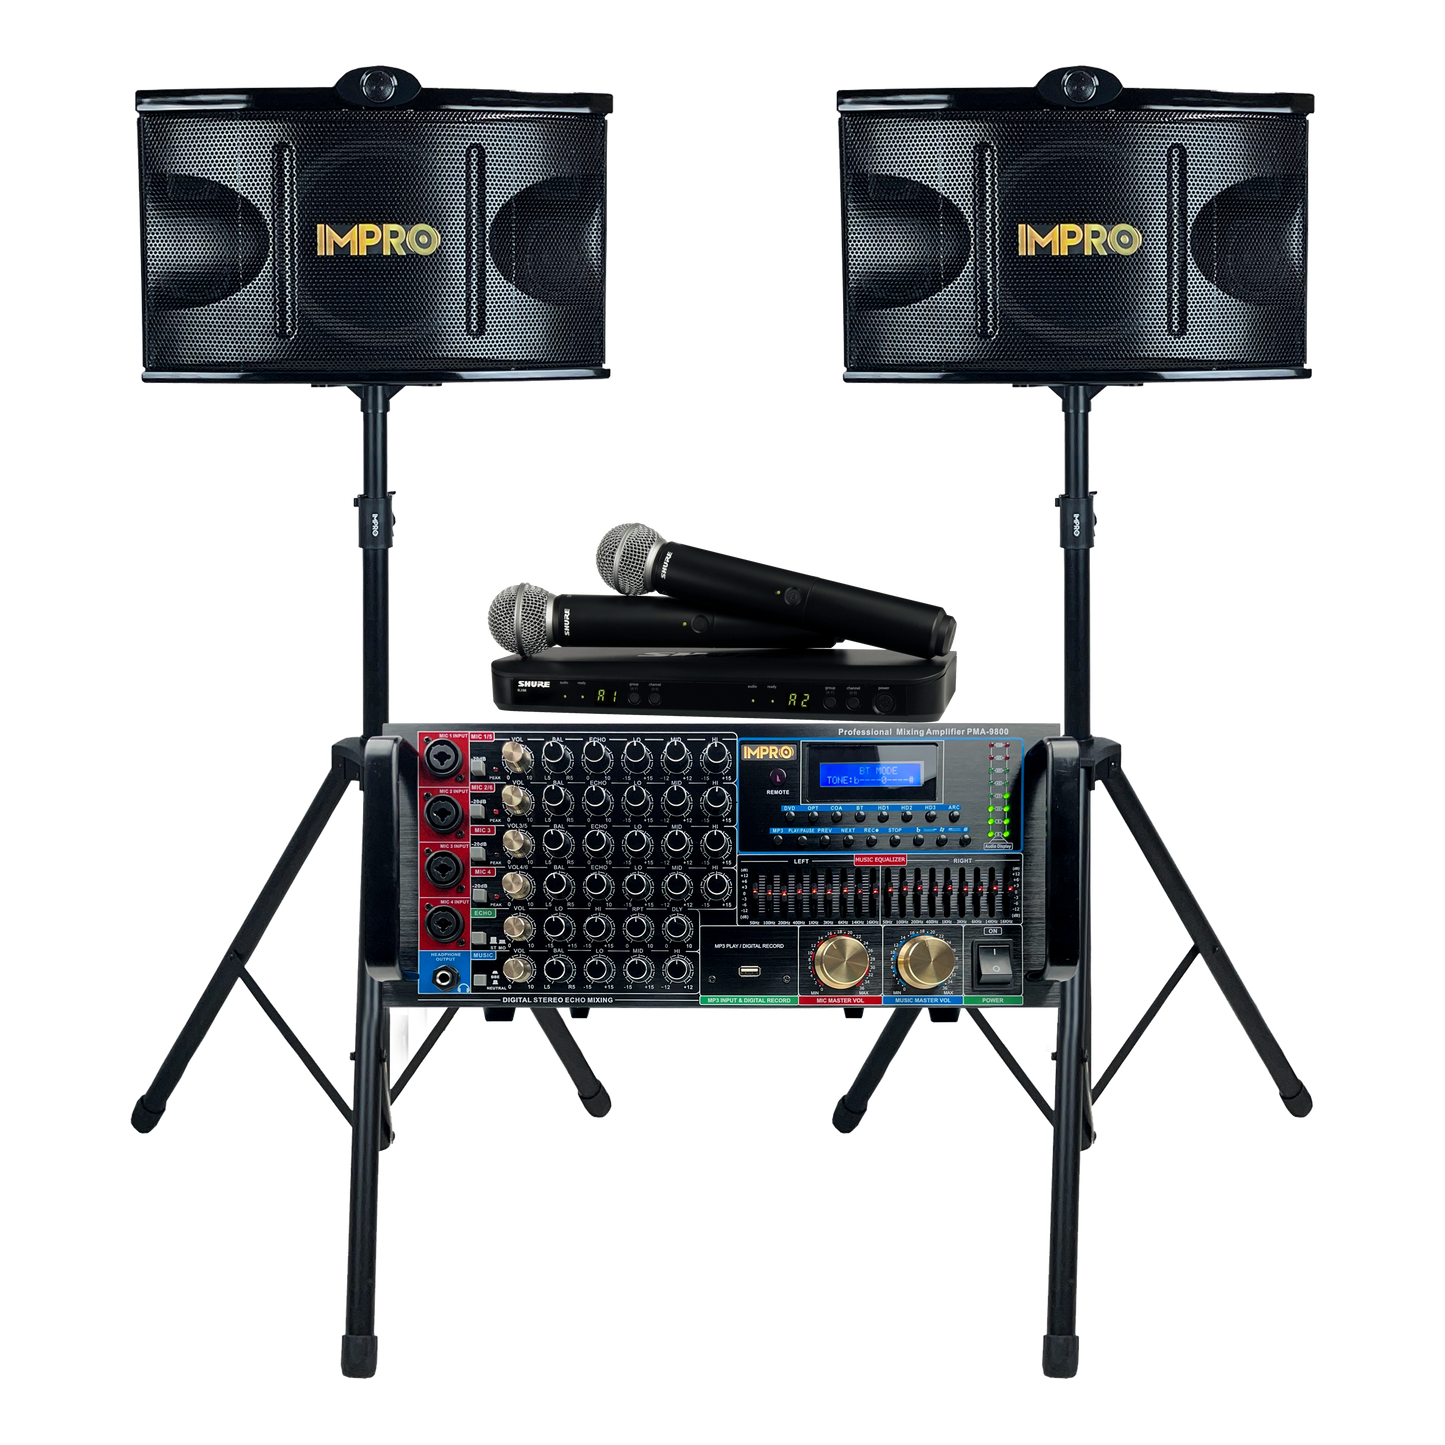 Ultra Elite Bundle with Mixing Amplifier, Speakers, SHURE BLX288 Microphones, and Accessories (4 items)